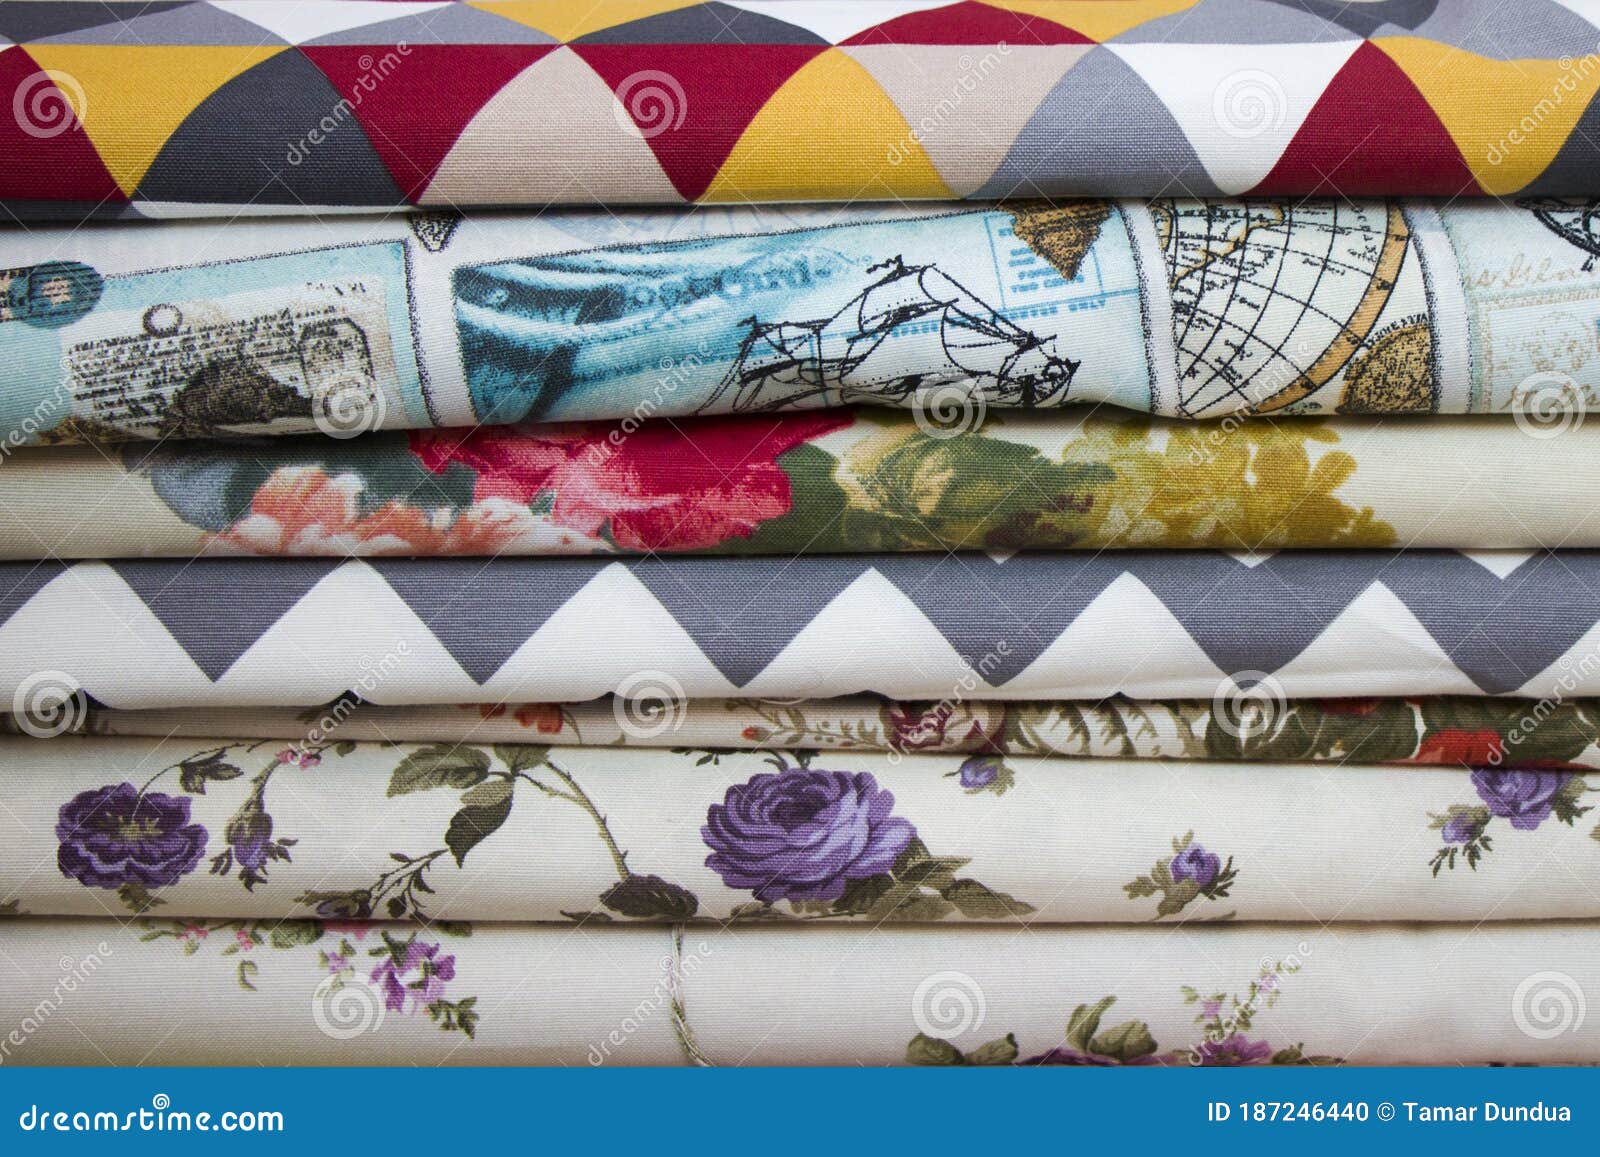 fabricate silk and cloth on the shop shelf, rolled silk in the market, multicolor and many pattern texture background